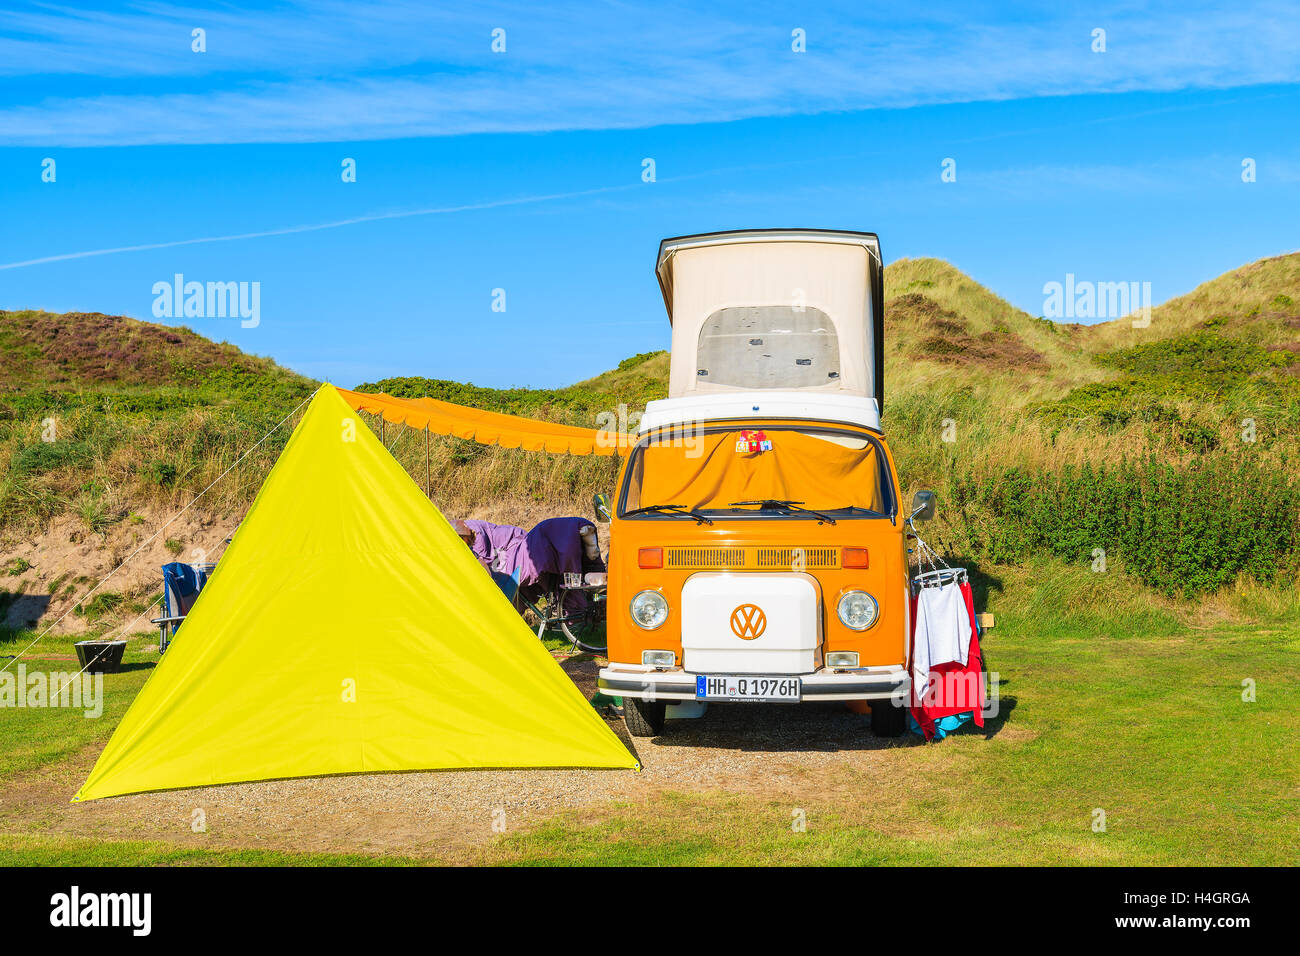 SYLT ISLAND, GERMANY - SEP 10, 2016: classic orange Volkswagen mini camper and yellow tent on green area of camping site located Stock Photo